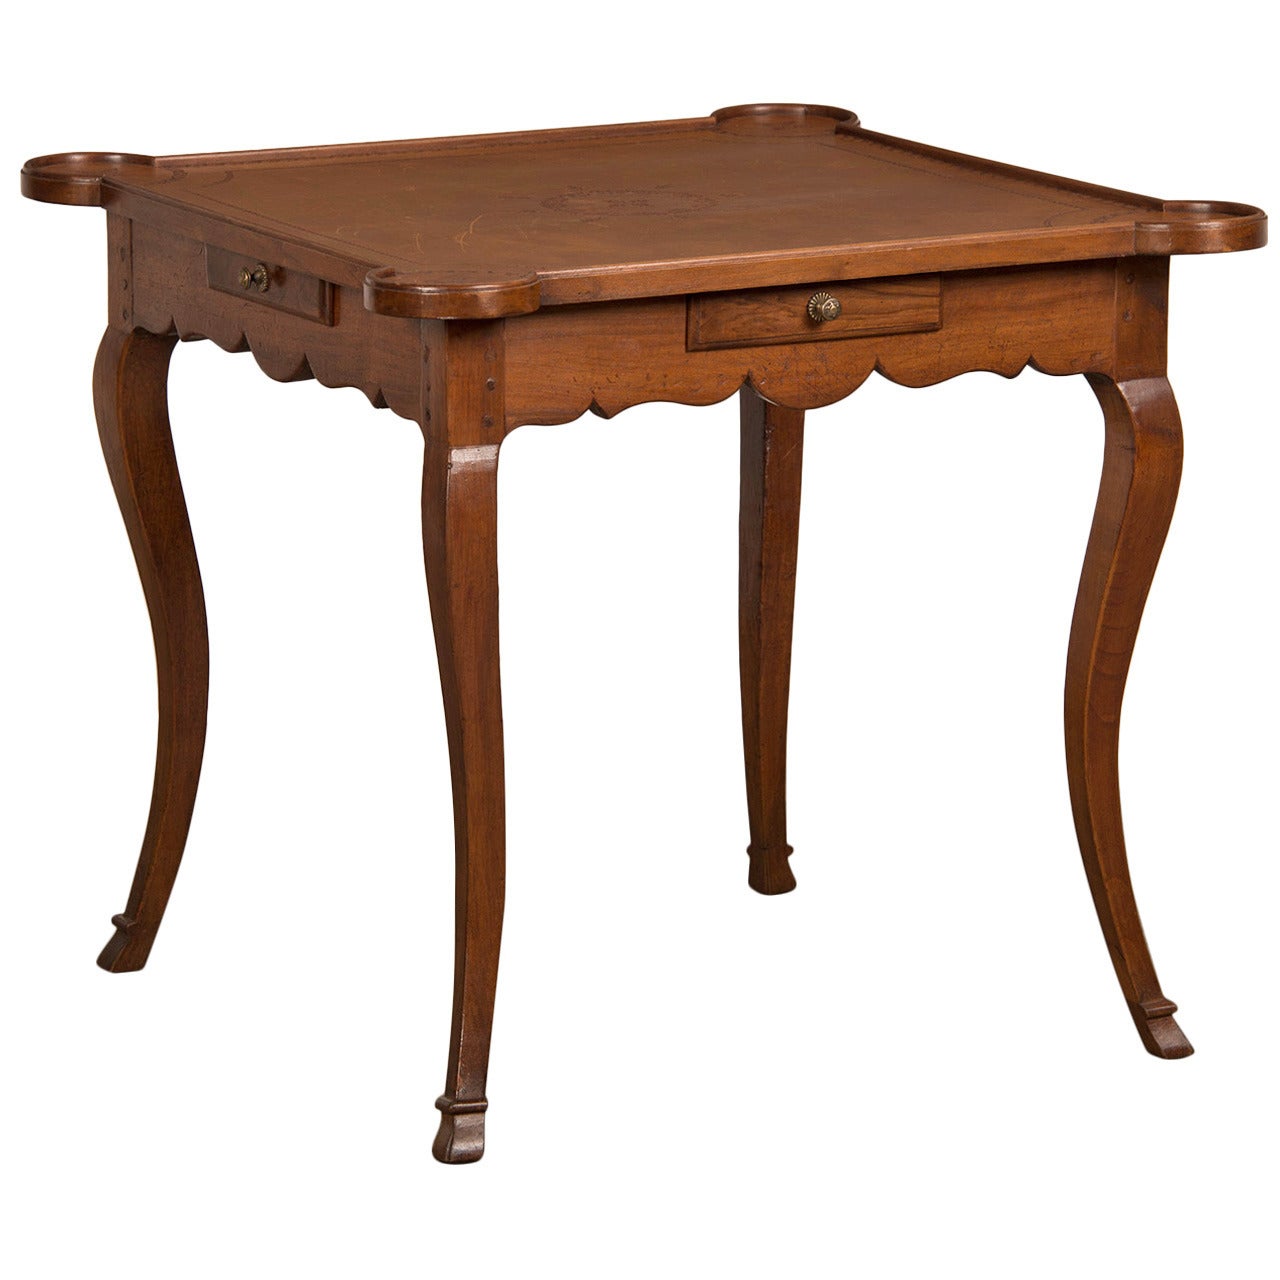 Antique French Louis XV Period Walnut Game Table with Leather Top, circa 1750